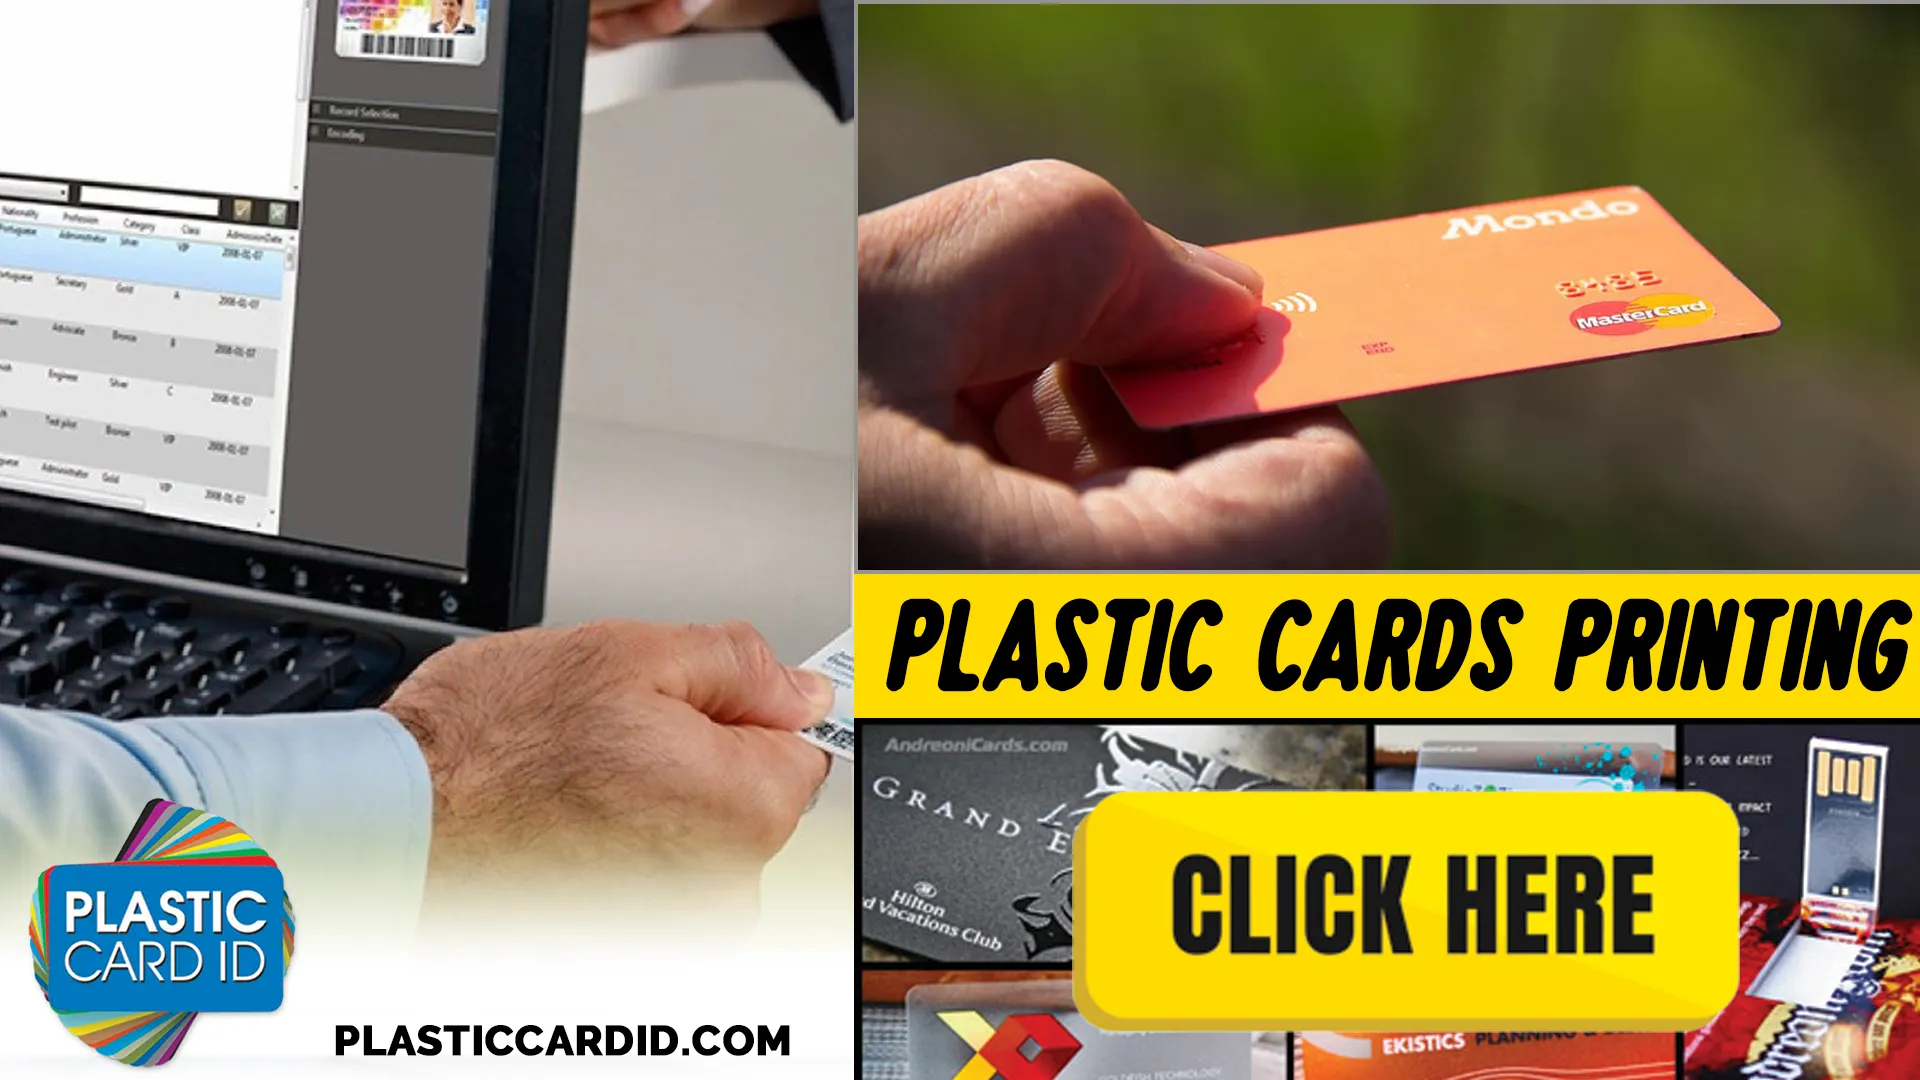 Making the Most of Your Plastic Cards